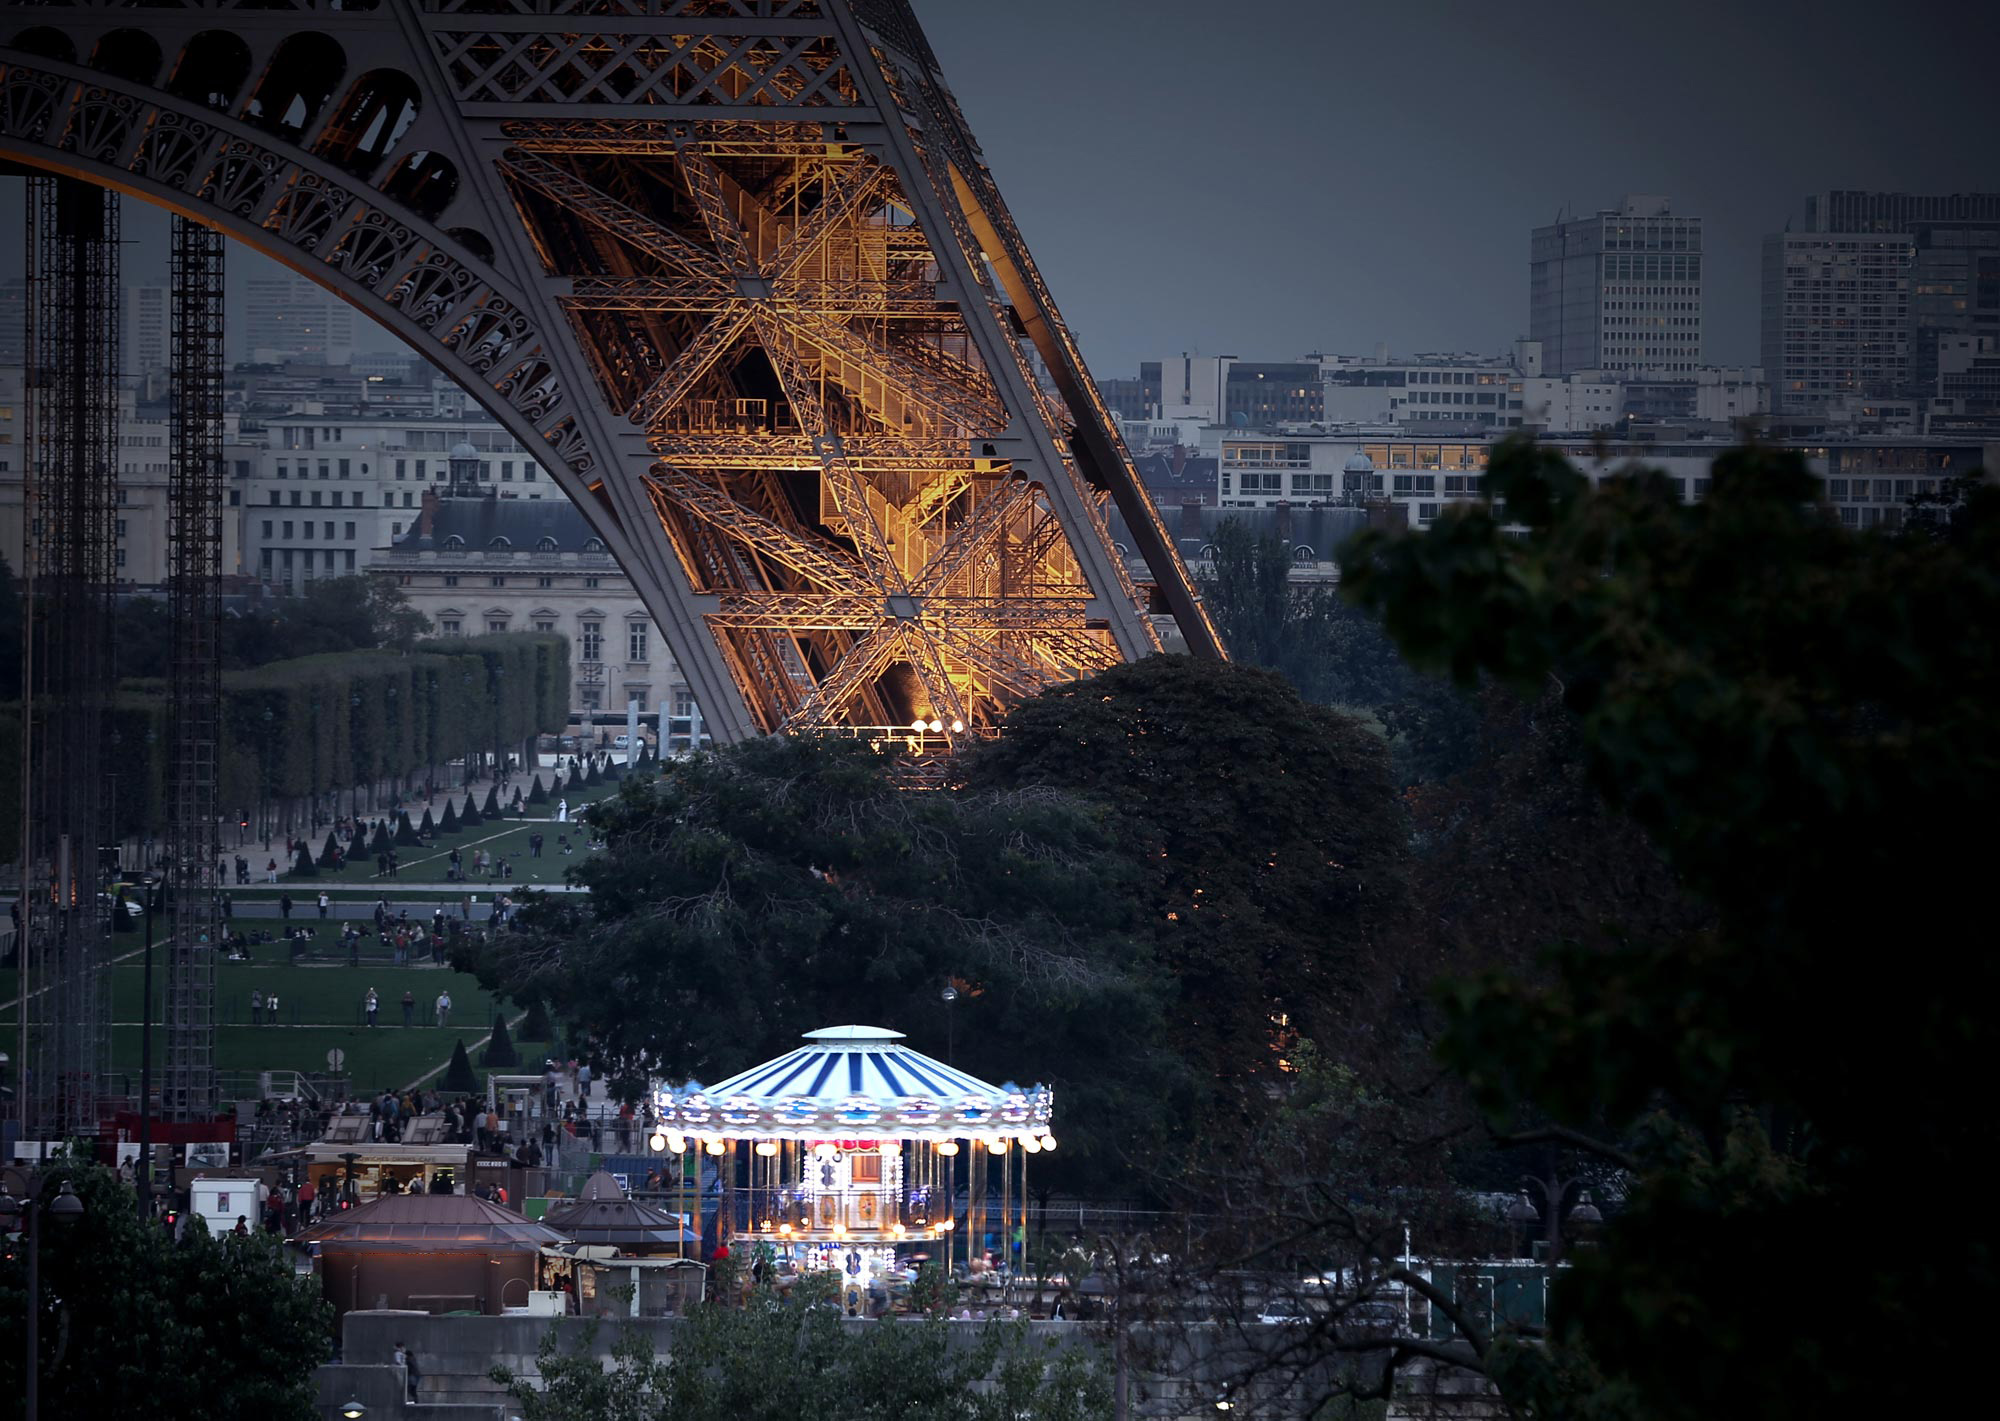 carousel and Eiffel Tower